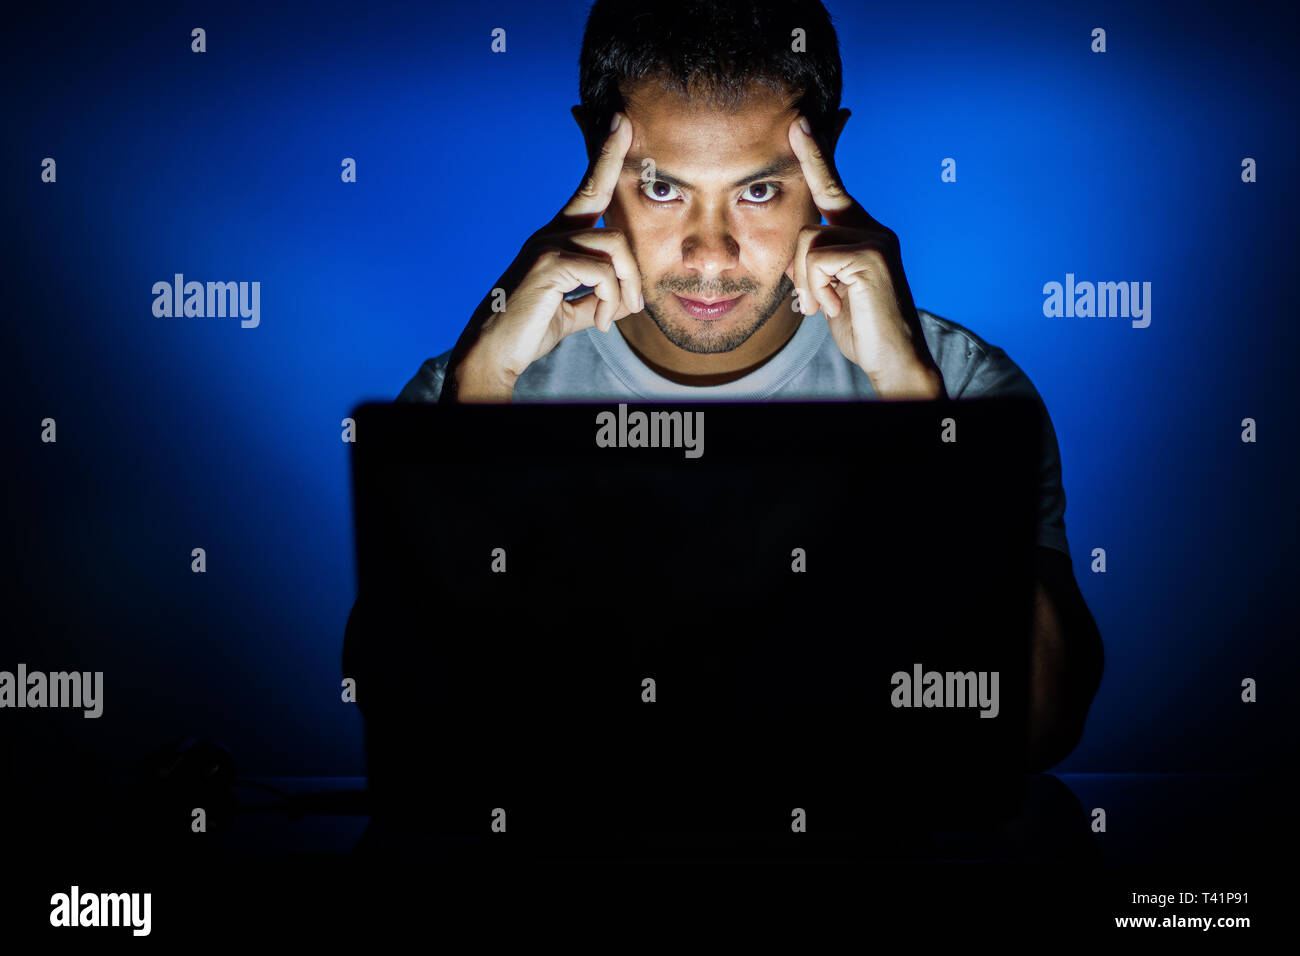 Man thinking in the computer with blue background Stock Photo